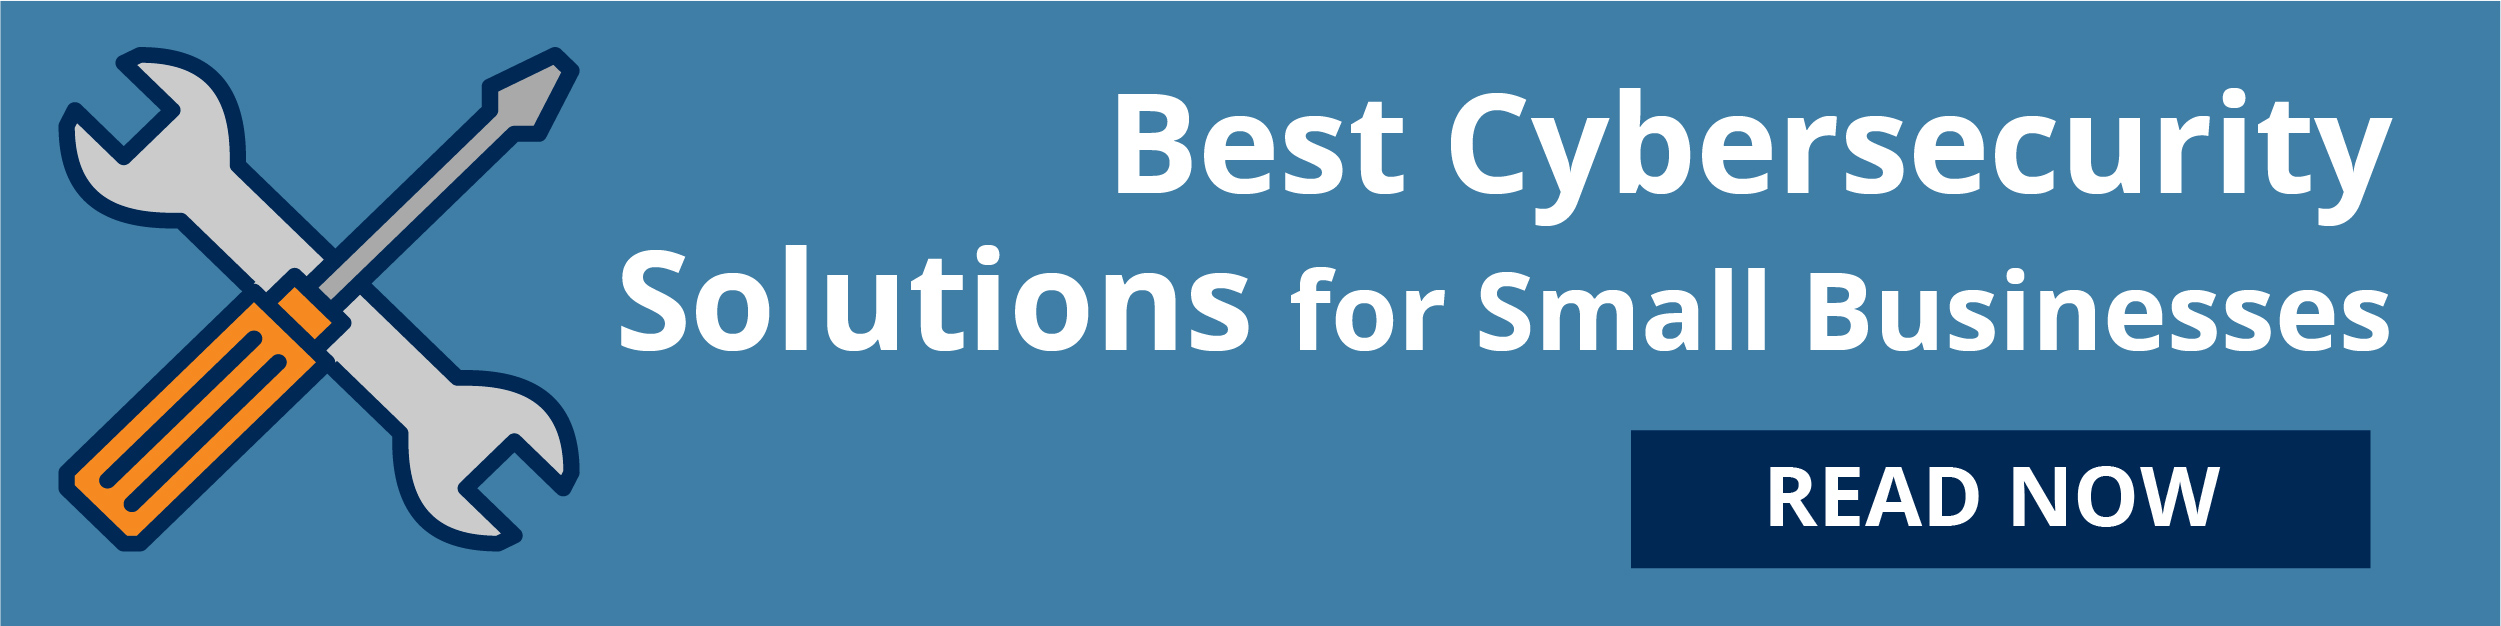 Best cybersecurity solutions for small businesses.